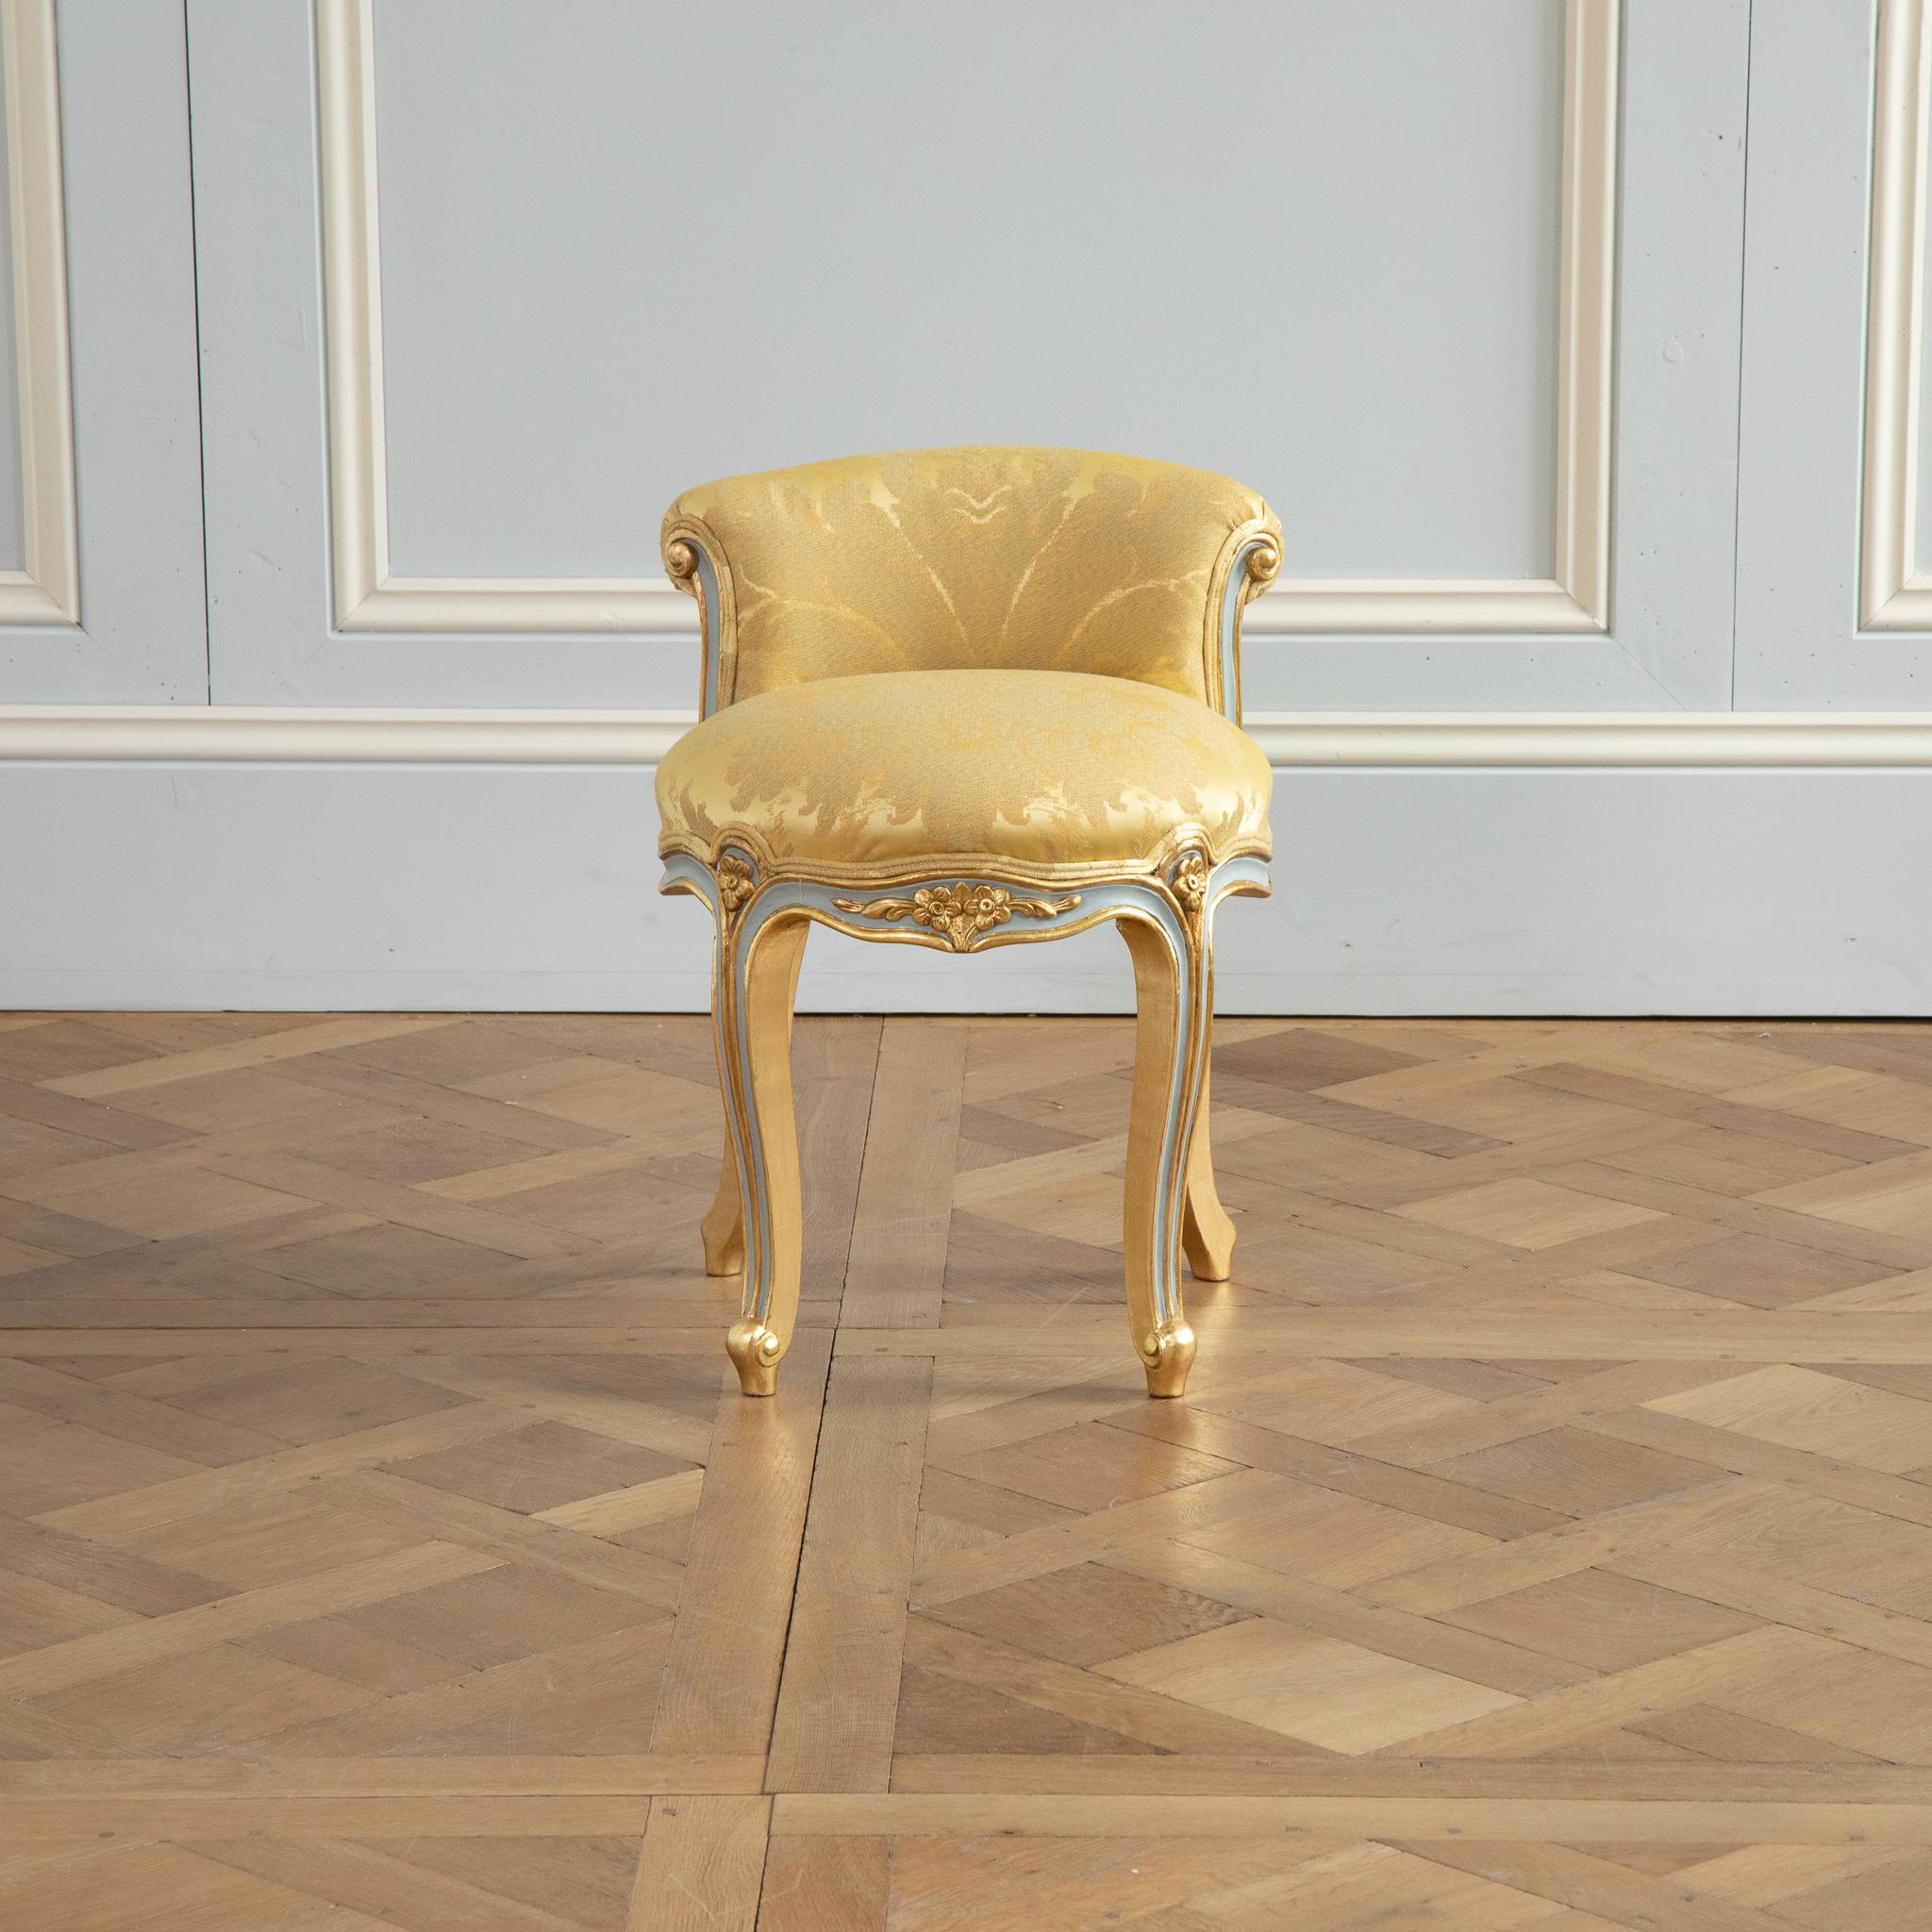 Louis XV crosse renverse style stool painted in a french grey with gold highlights.